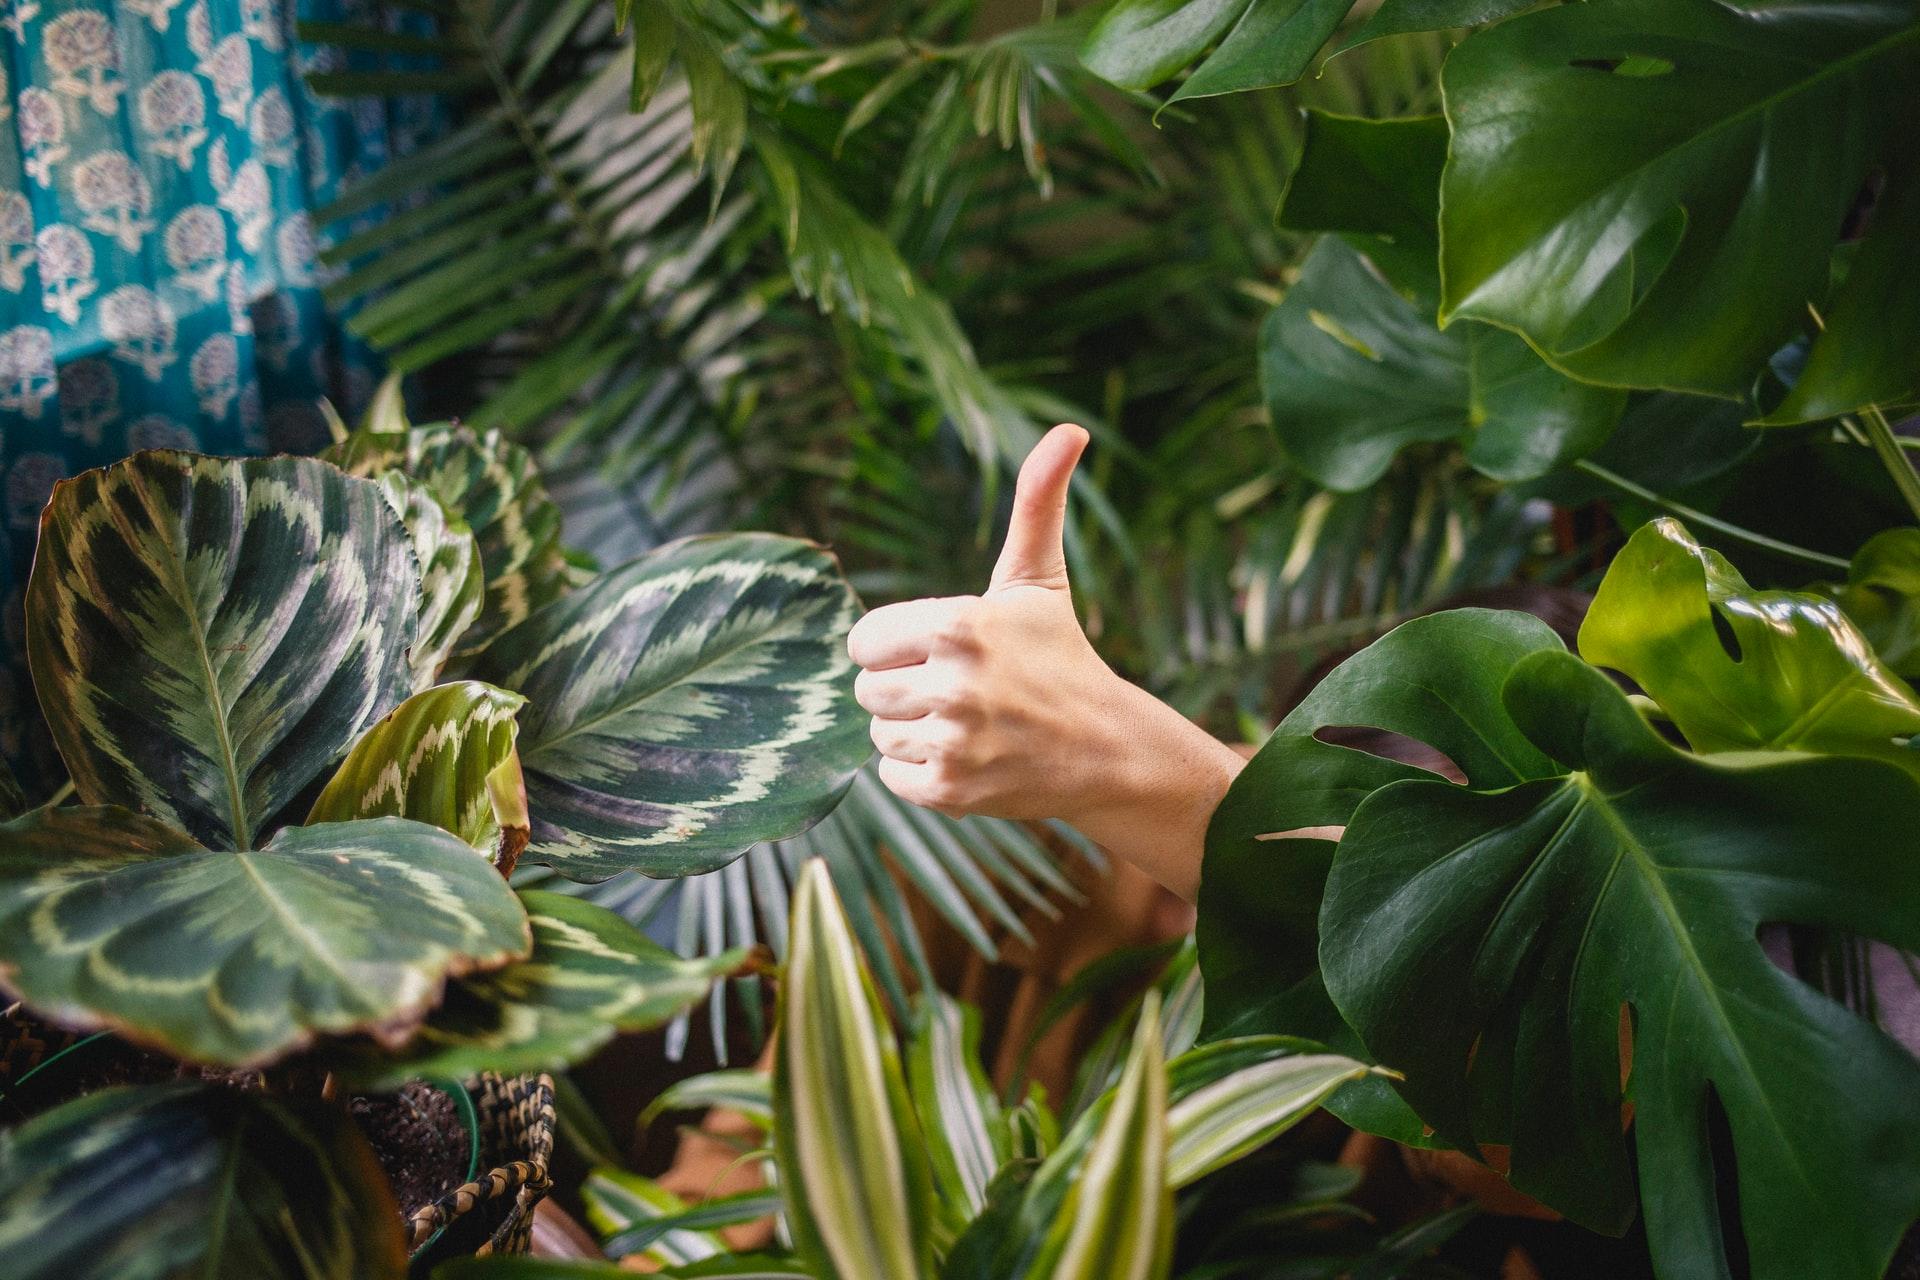 Hand showing a thumbs up surrounded by green foliage